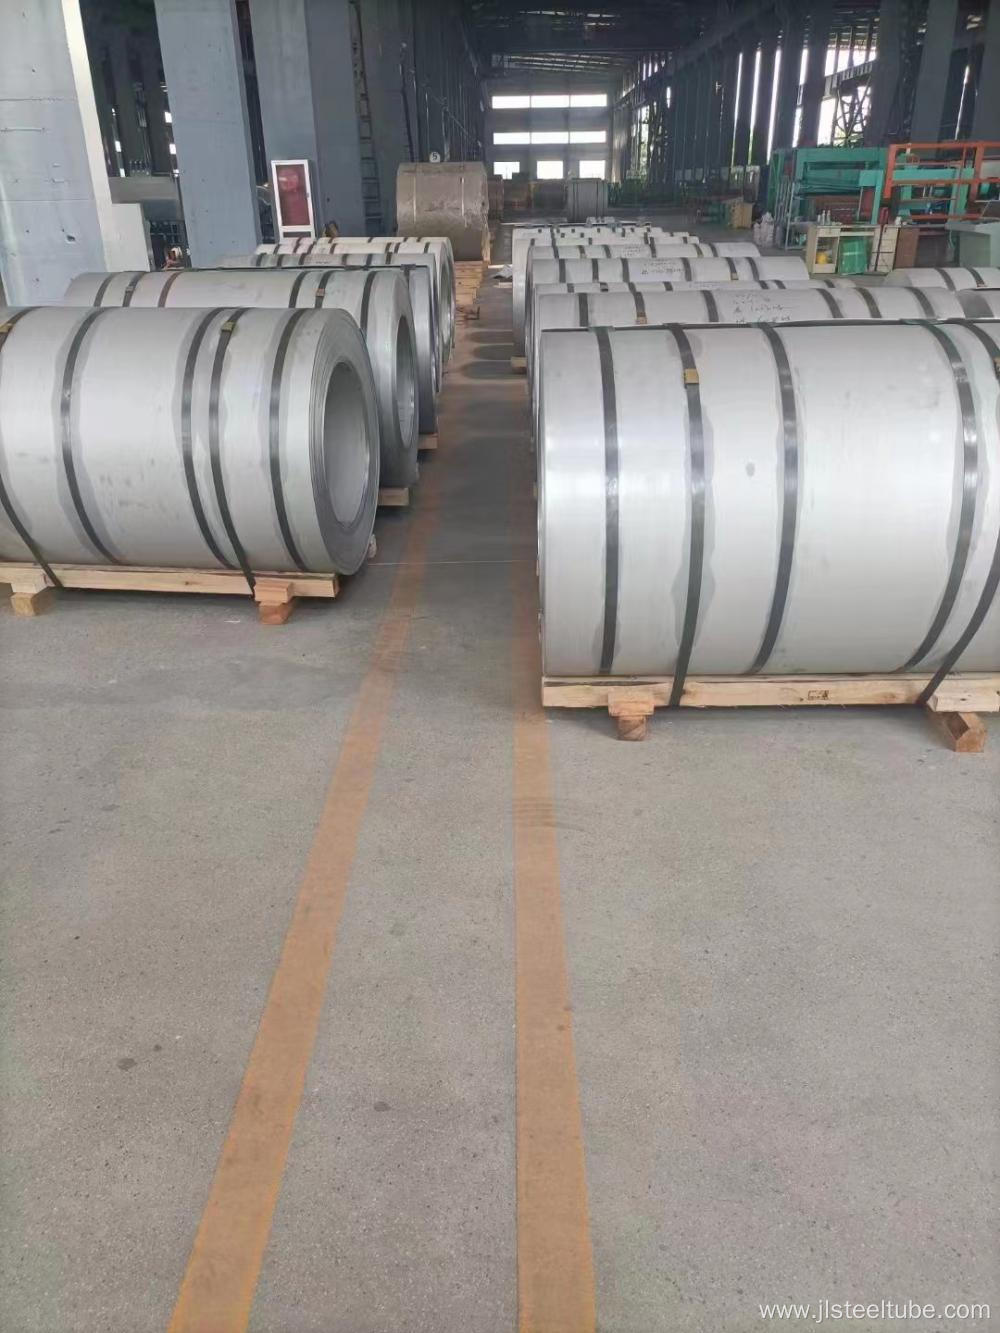 Hot Dipped Cold Rolled Galvanized Steel Coils